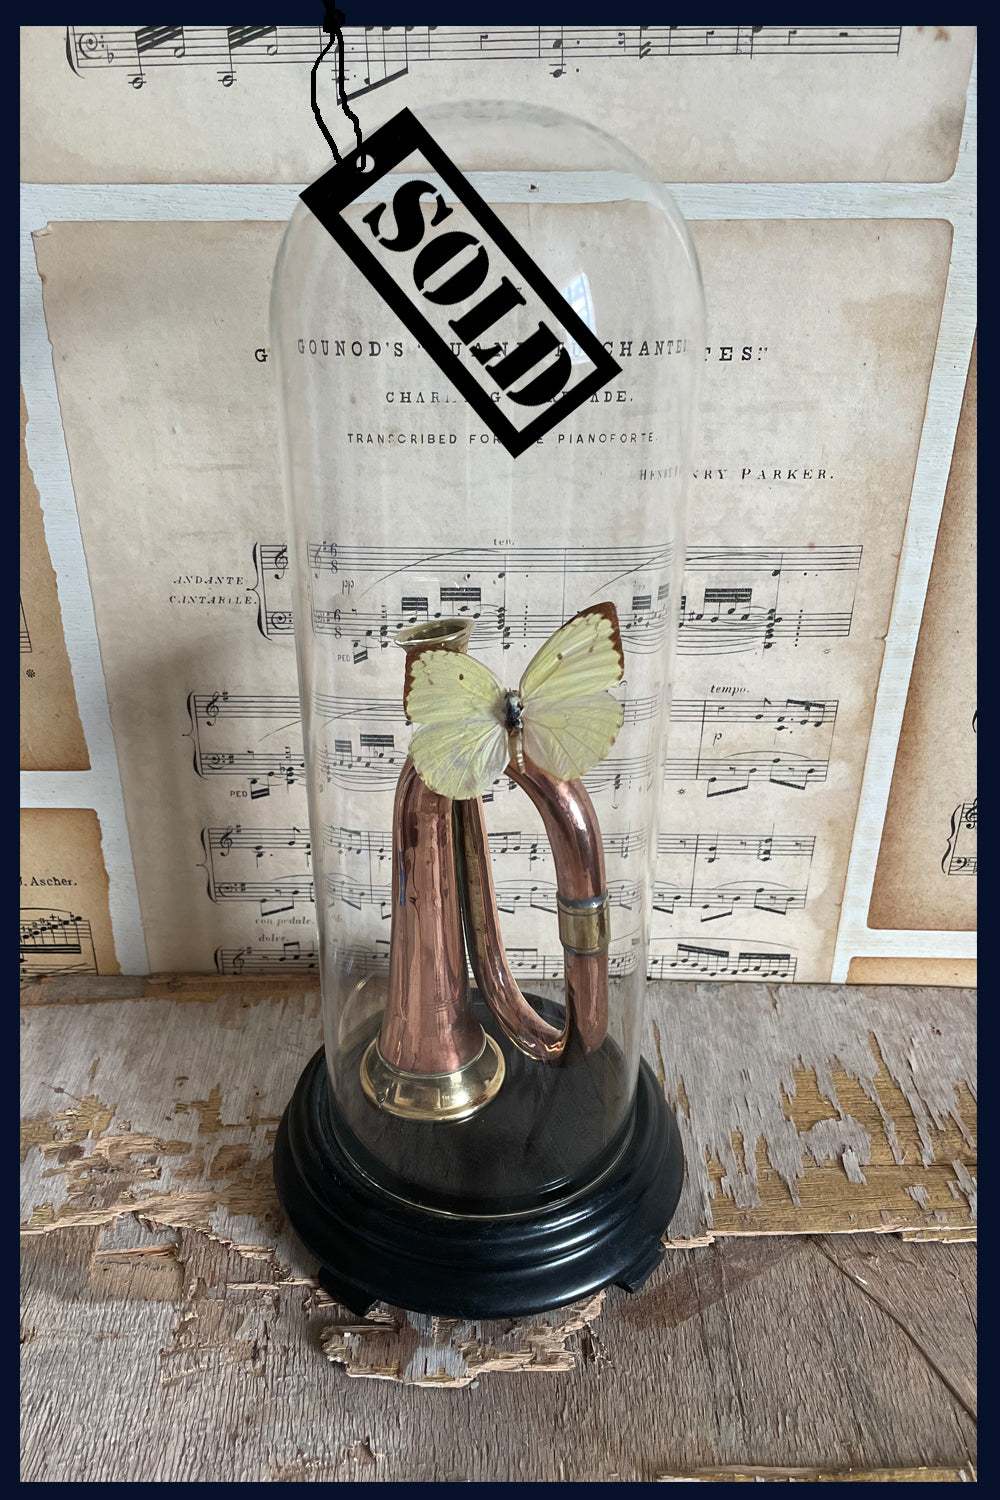 SOLD - Enigma Variations Collection: Miniature Antique Copper & Brass Bugle with a Vintage Butterfly under a Glass Display Dome